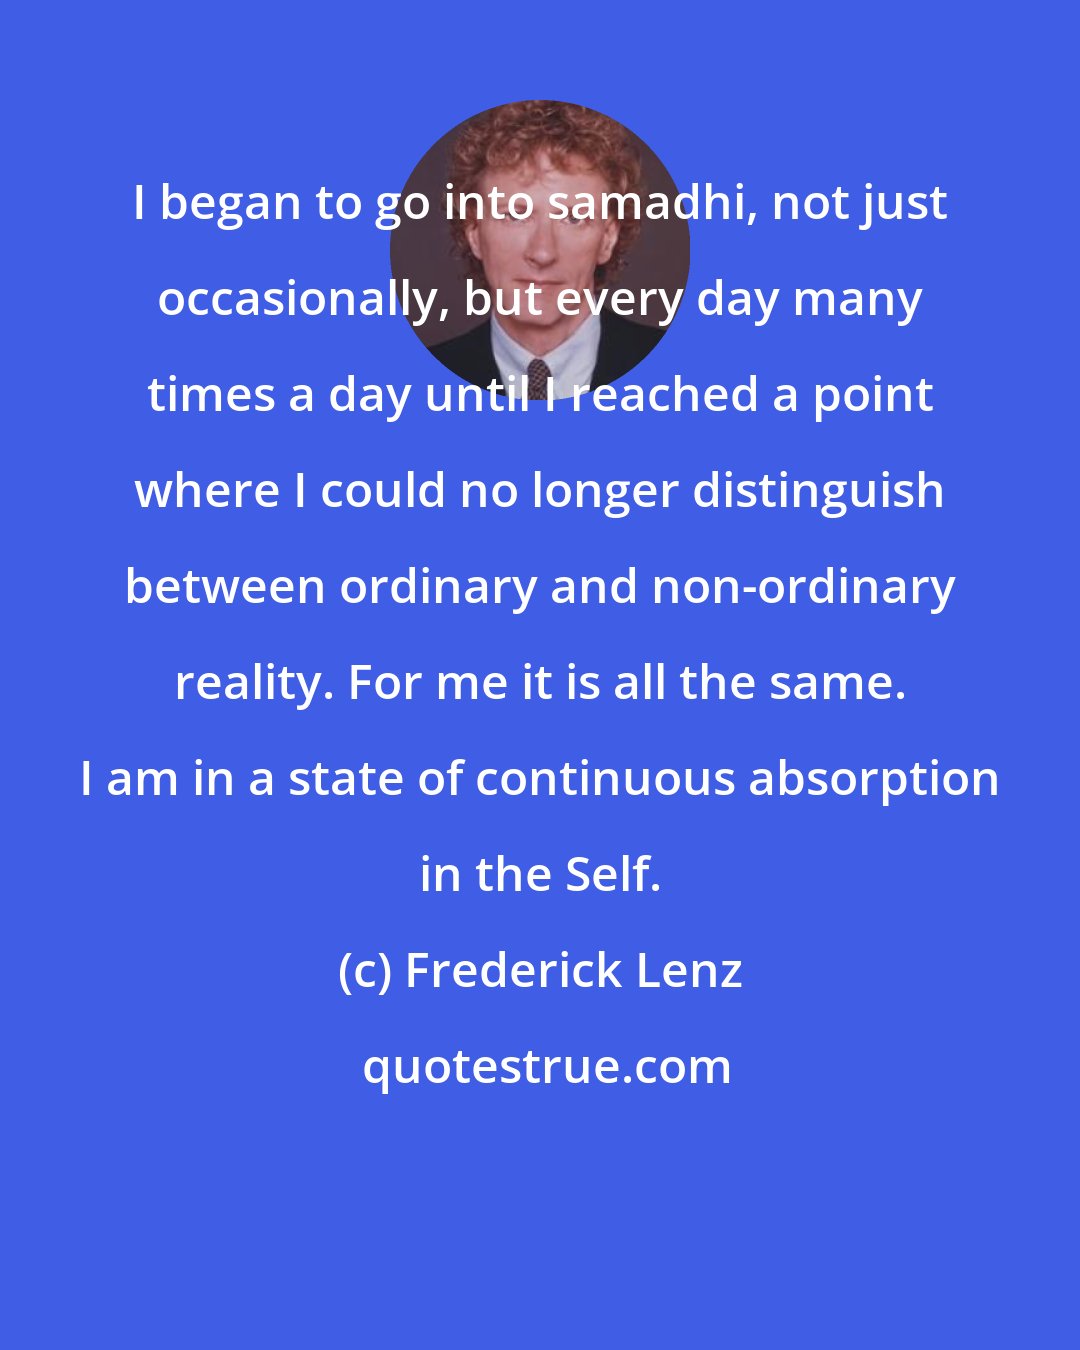 Frederick Lenz: I began to go into samadhi, not just occasionally, but every day many times a day until I reached a point where I could no longer distinguish between ordinary and non-ordinary reality. For me it is all the same. I am in a state of continuous absorption in the Self.